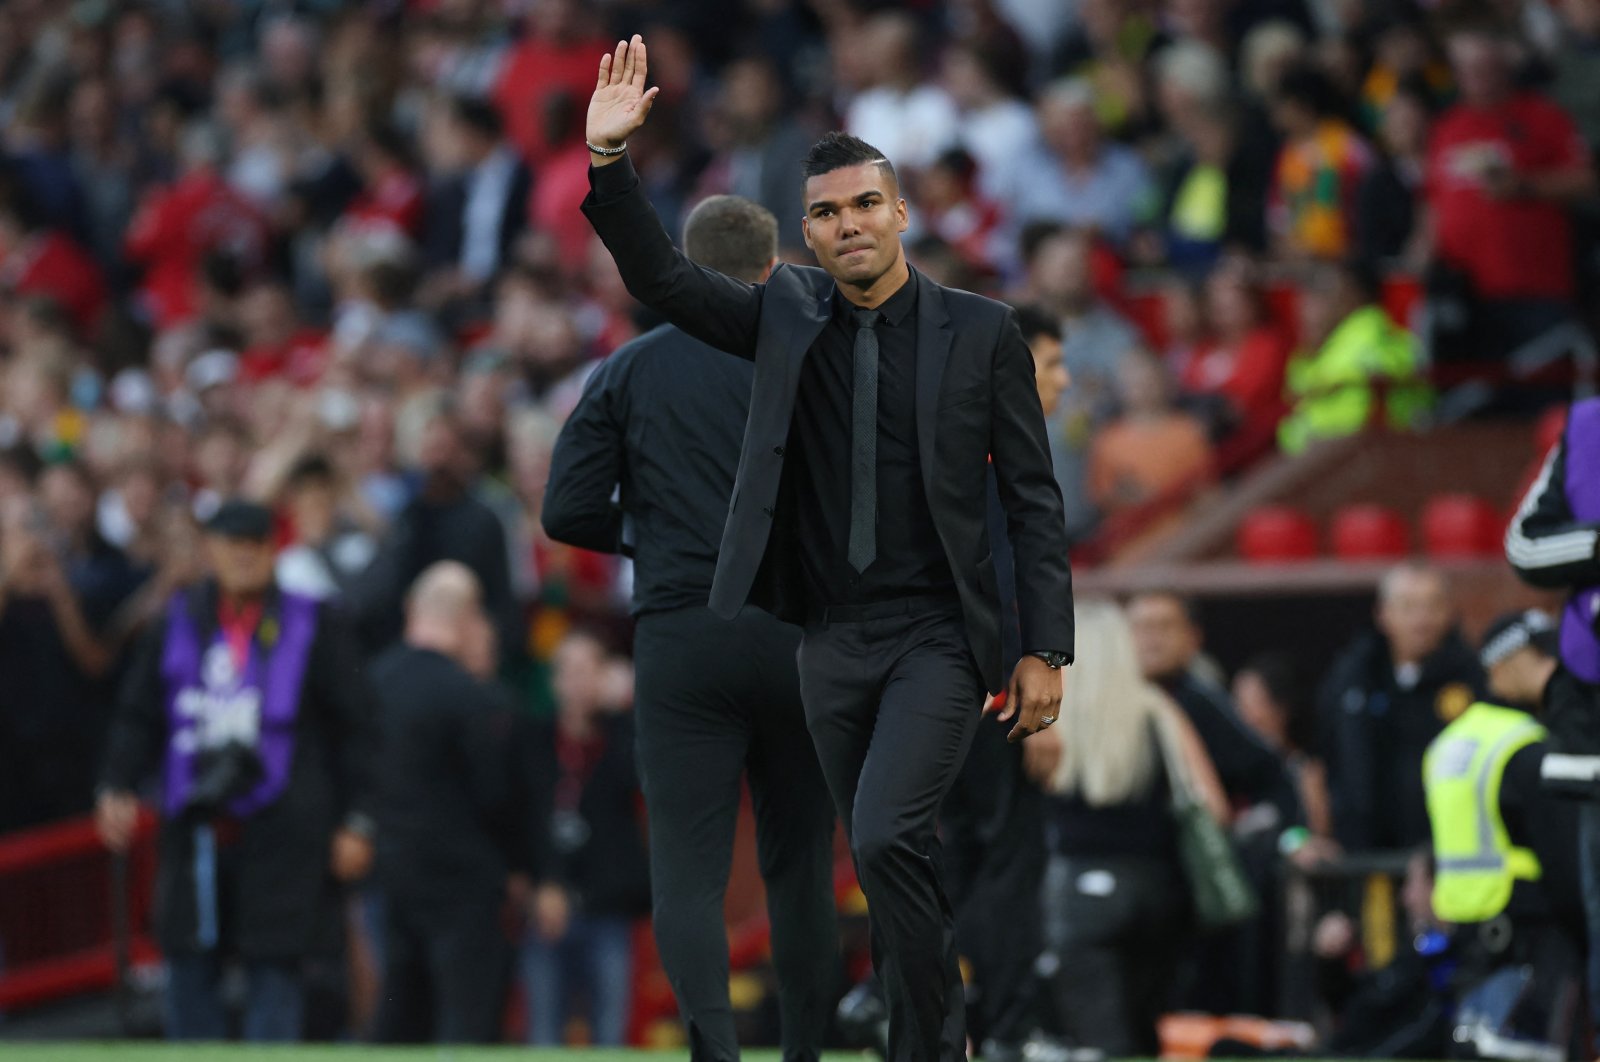 Manchester United&#039;s new player Casemiro waves to supporters prior to the start of the English Premier League soccer match between Manchester United and Liverpool at Old Trafford stadium, in Manchester, England, Aug. 22, 2022. (Reuters Photo)